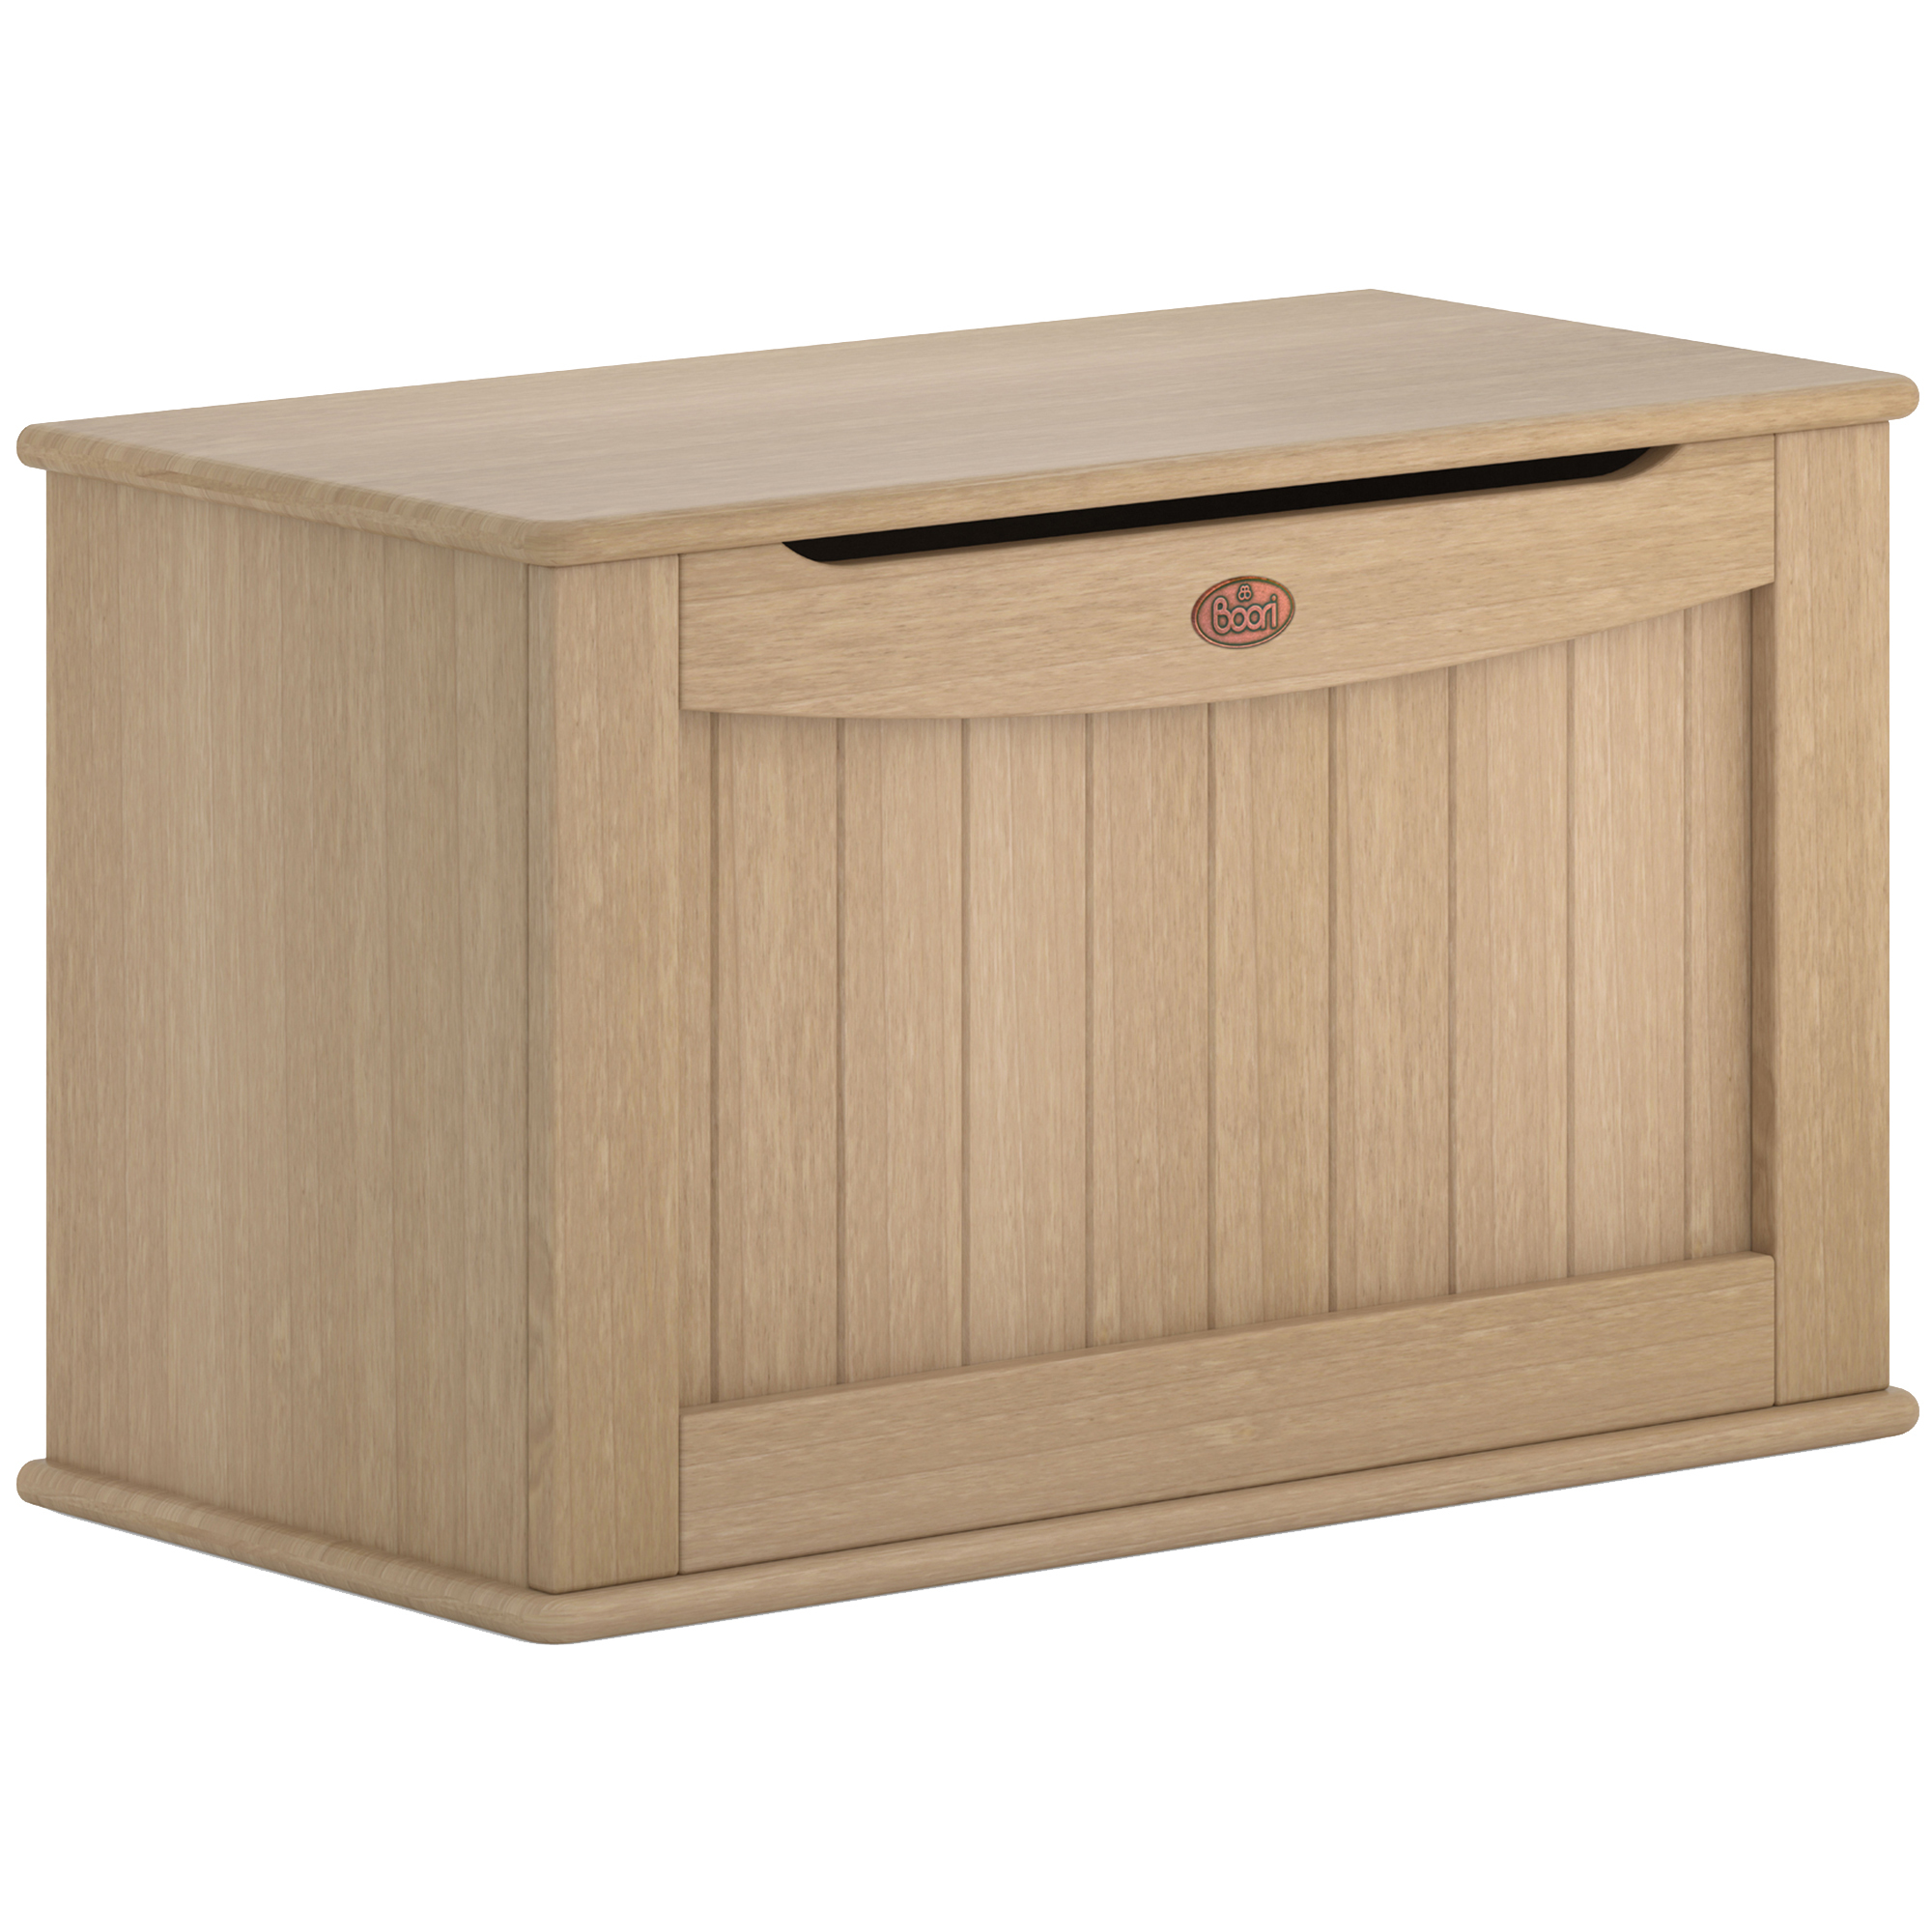 wooden toy box afterpay